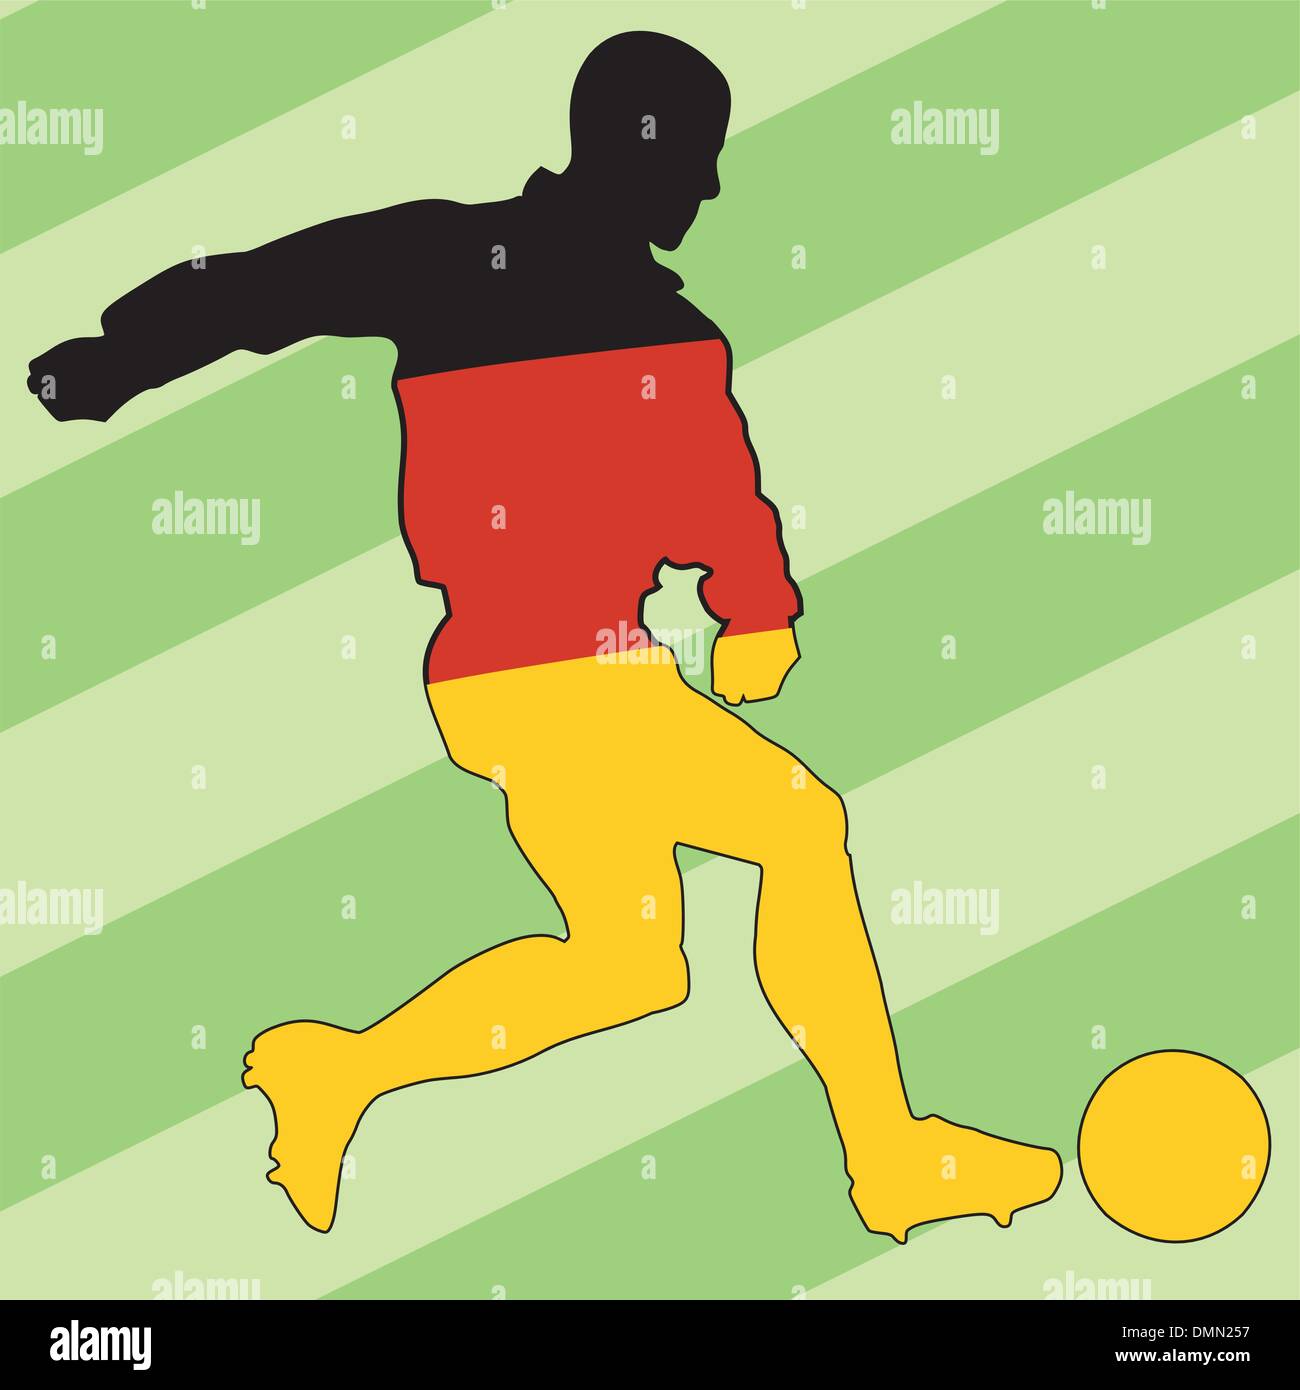 Soccer series icon in national colours Stock Vector